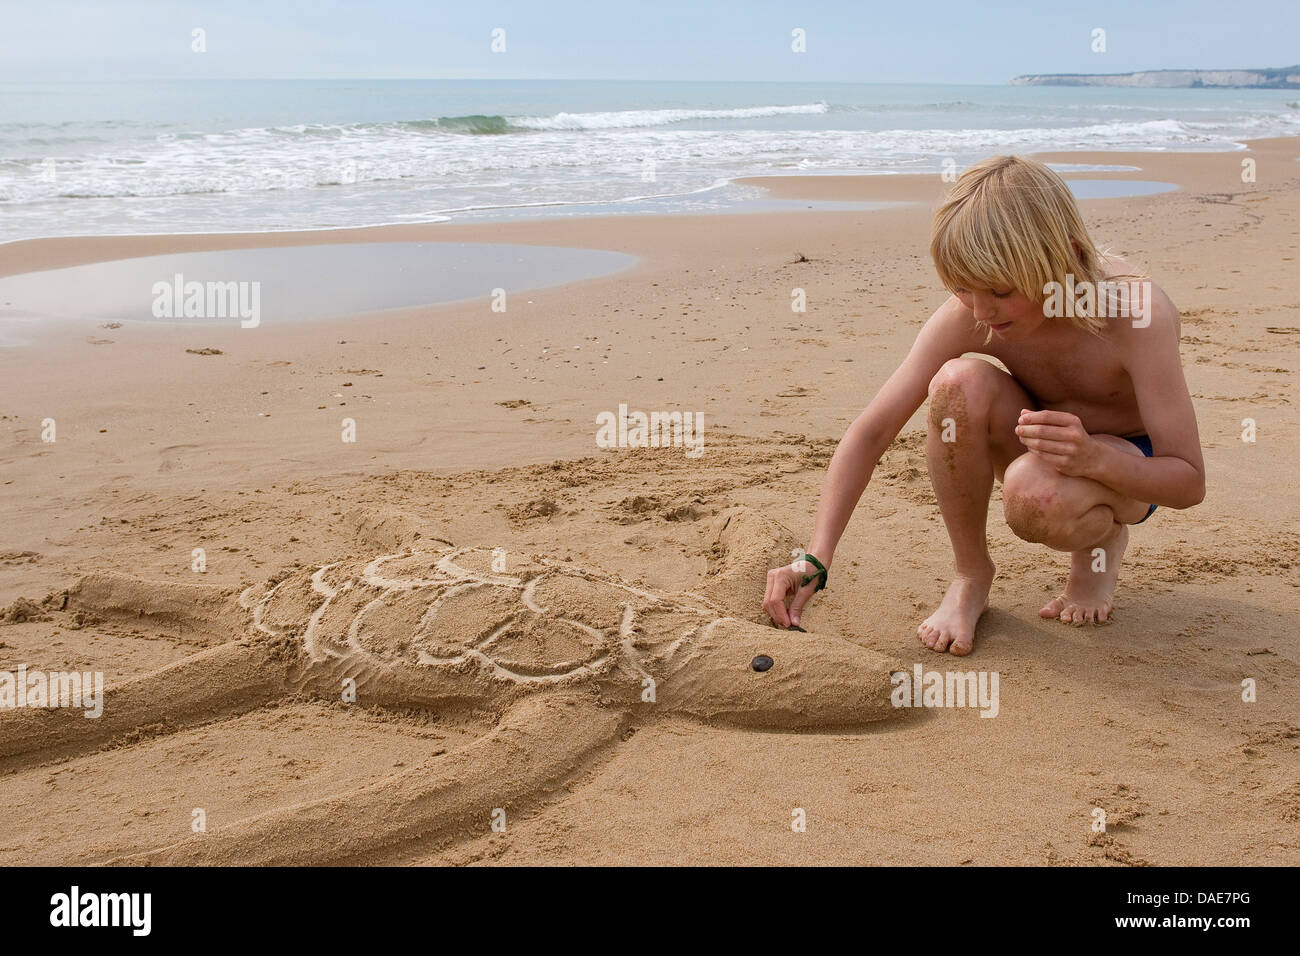 boy forming a sea turtle coming to shore for egg deposition at the beach in the sand, Italy, Sicilia Stock Photo